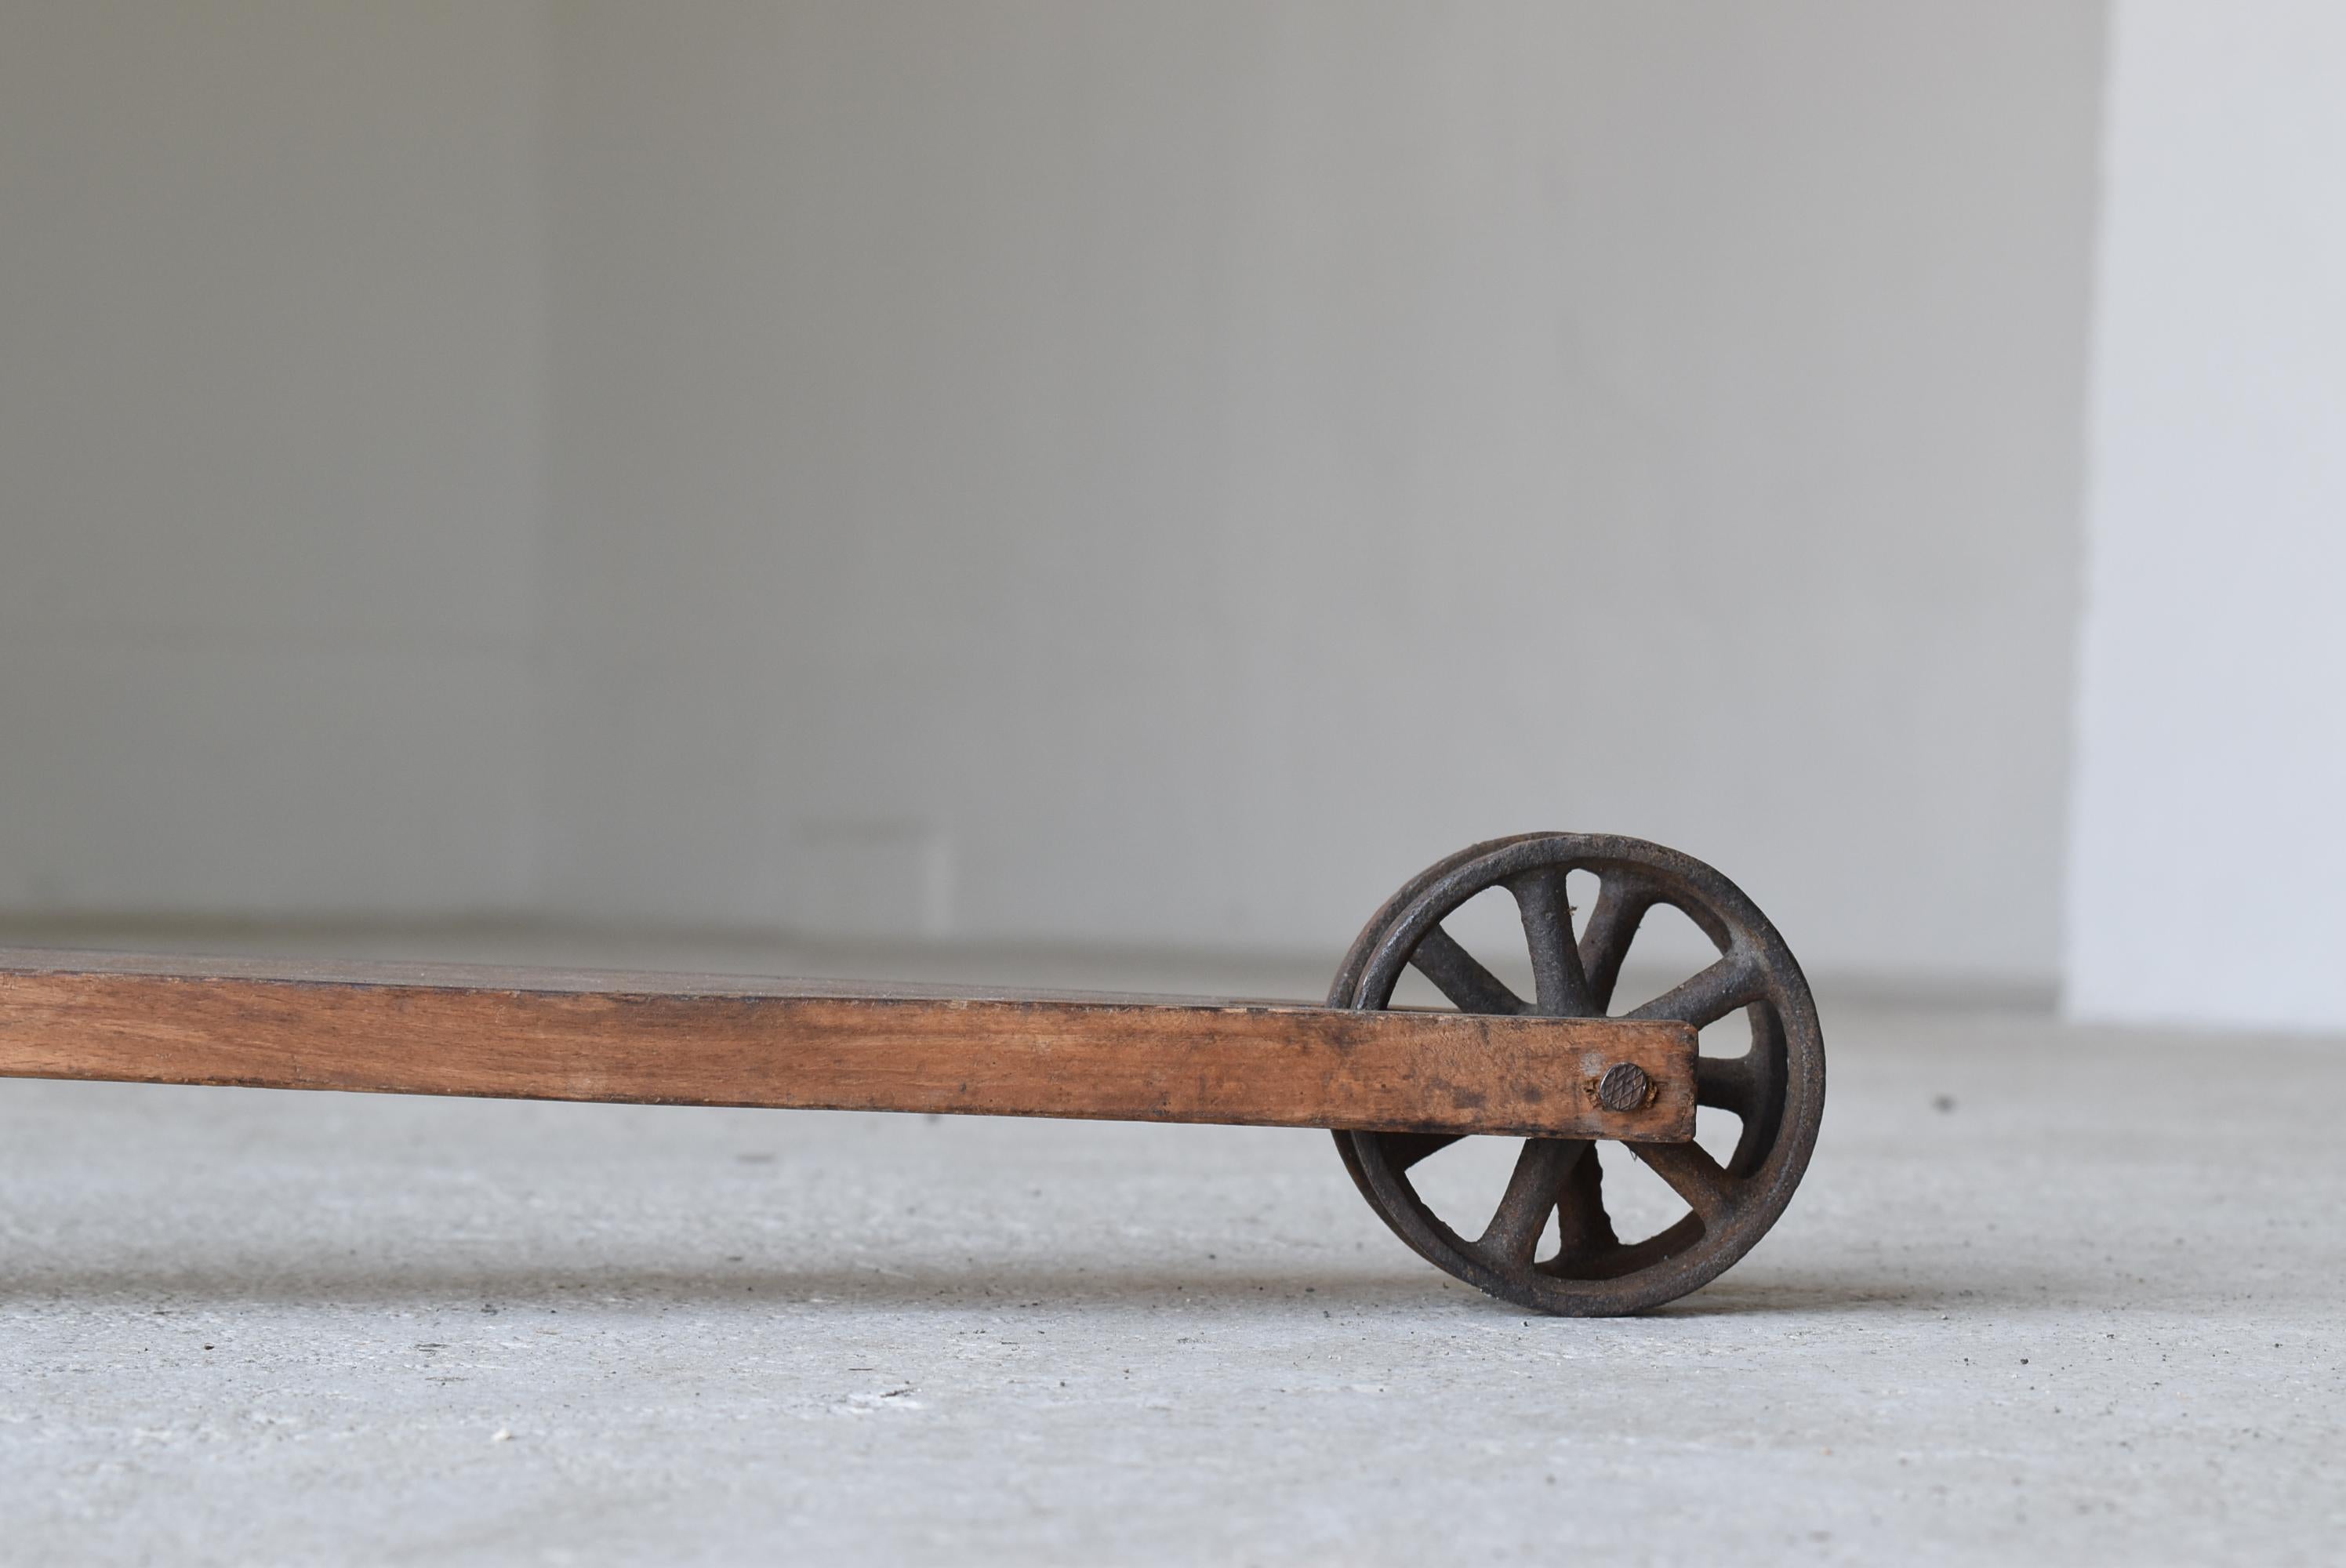 Showa Japanese Antique Kick Scooter 1900s-1920s/Object Toys Decoration